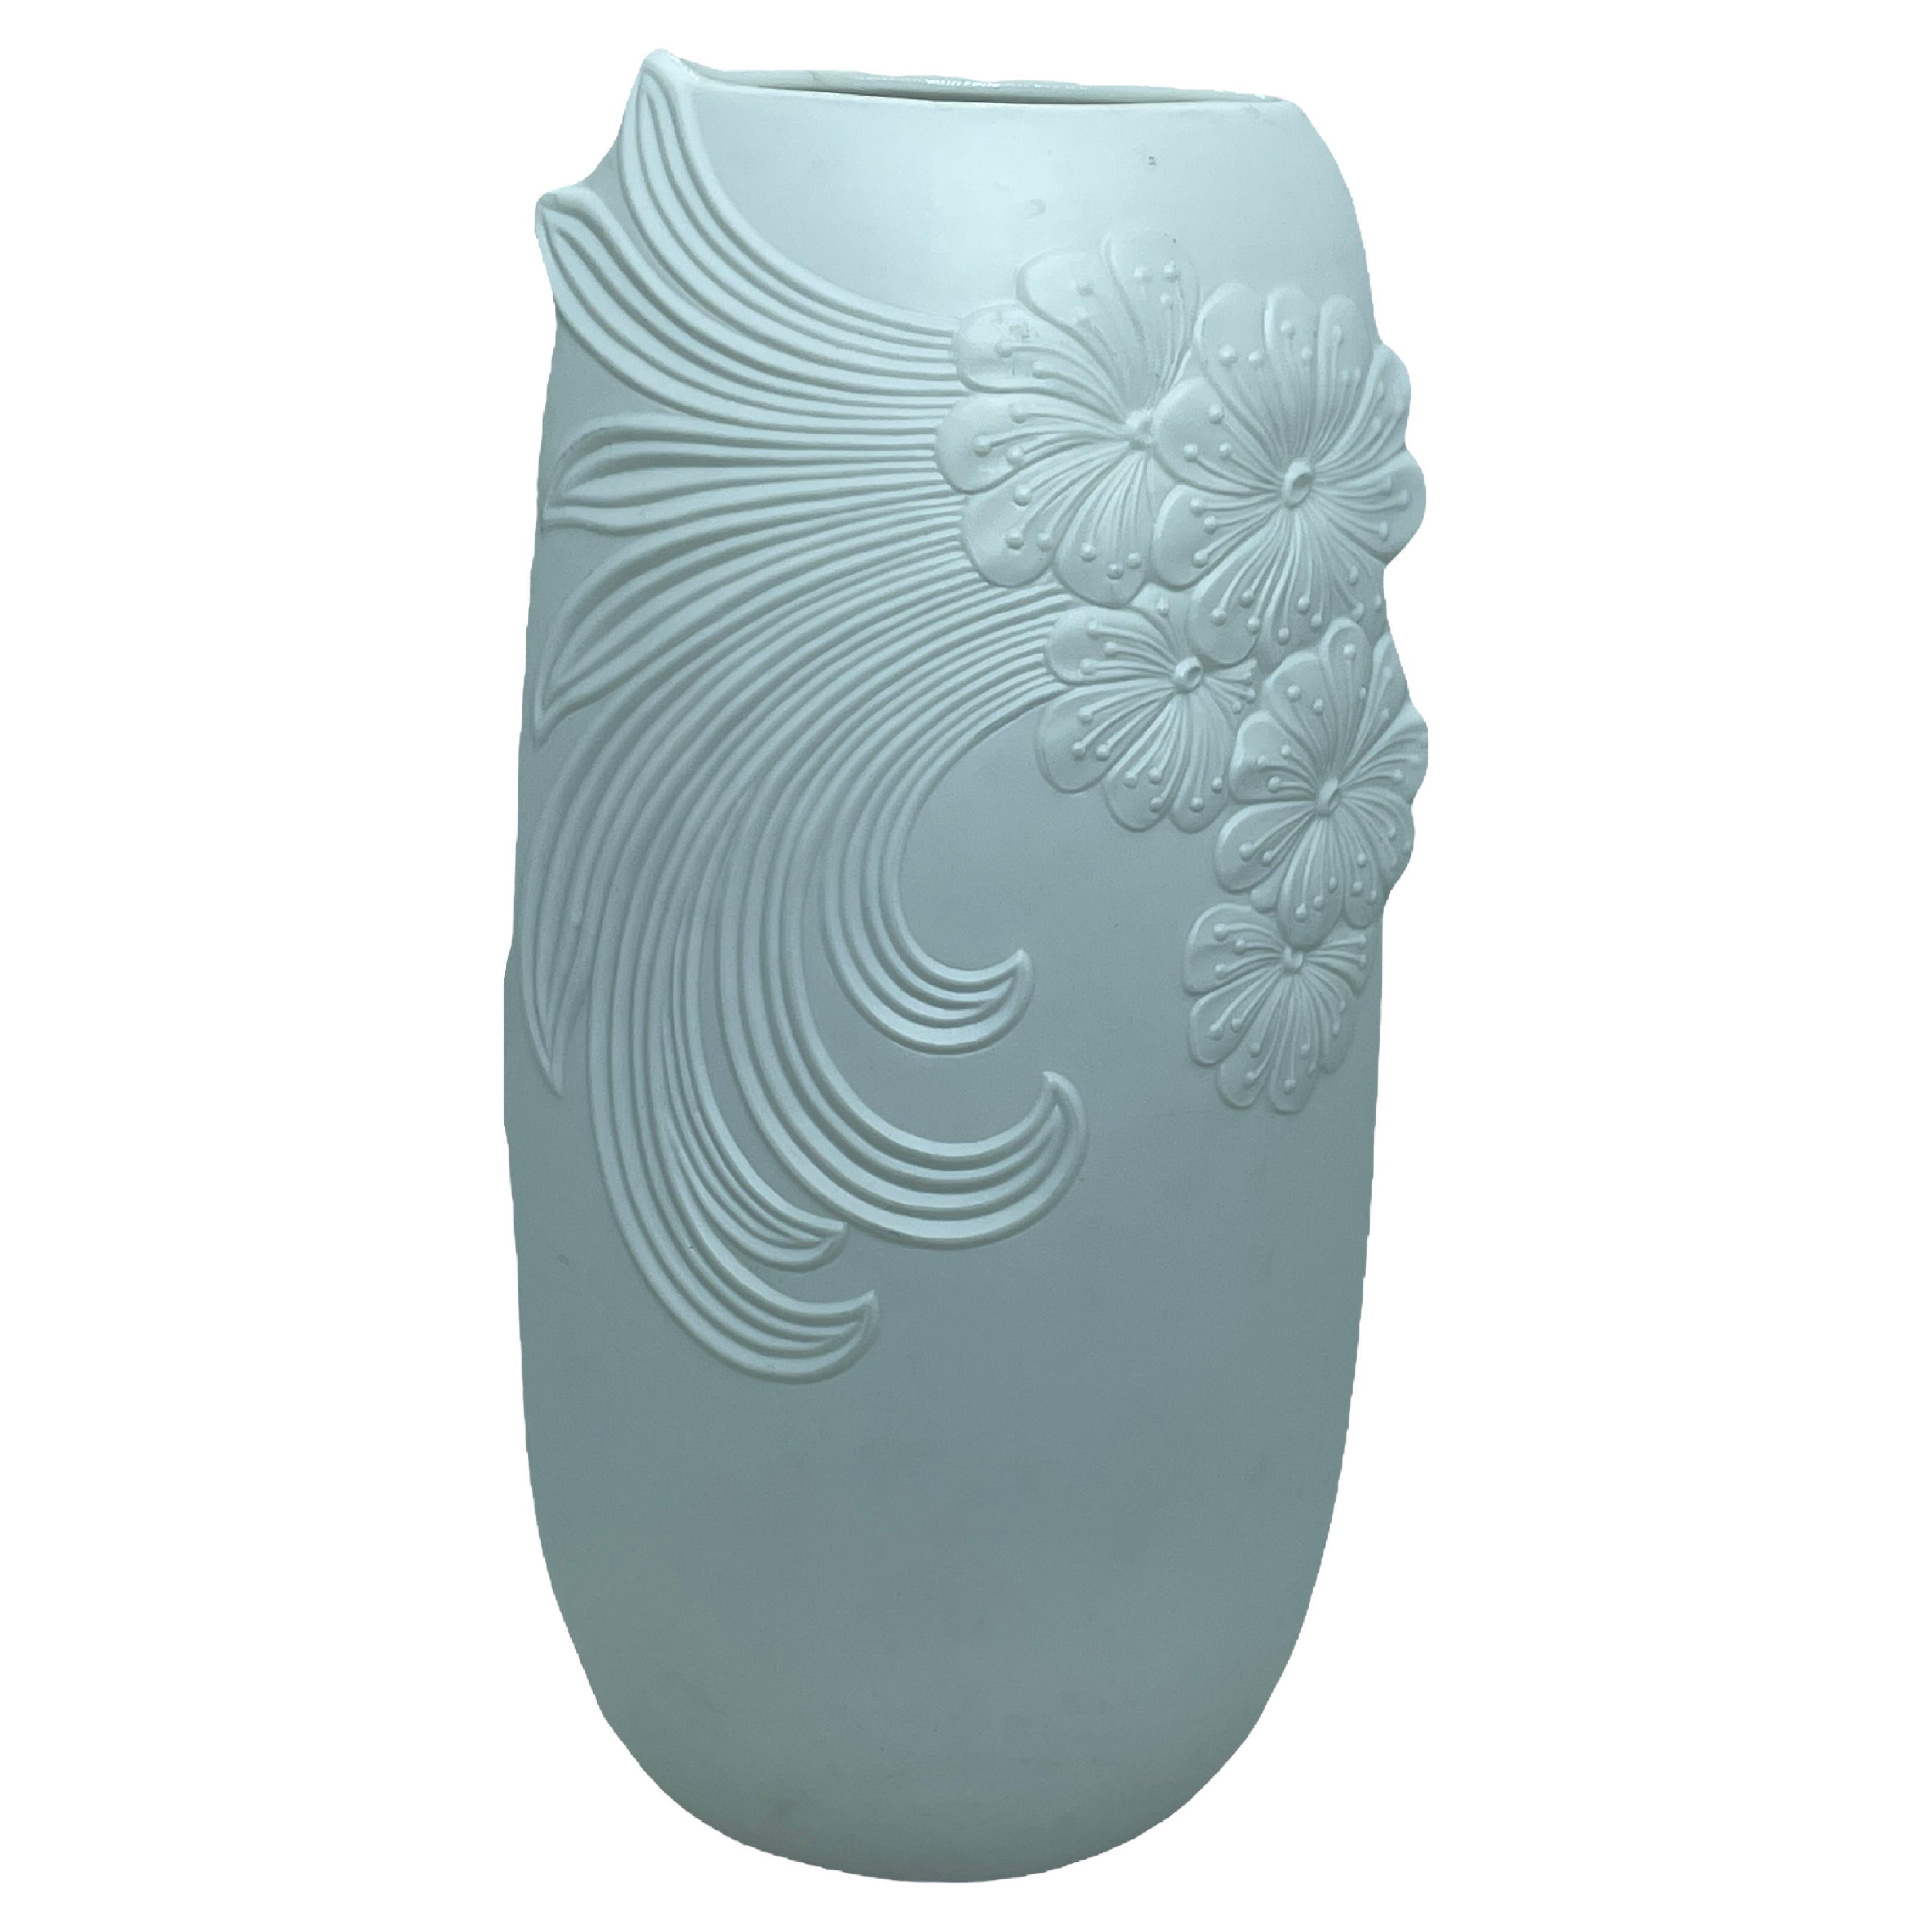 Beautiful Midcentury Bisque Vase by Kaiser Porcelain, Germany, 1970s